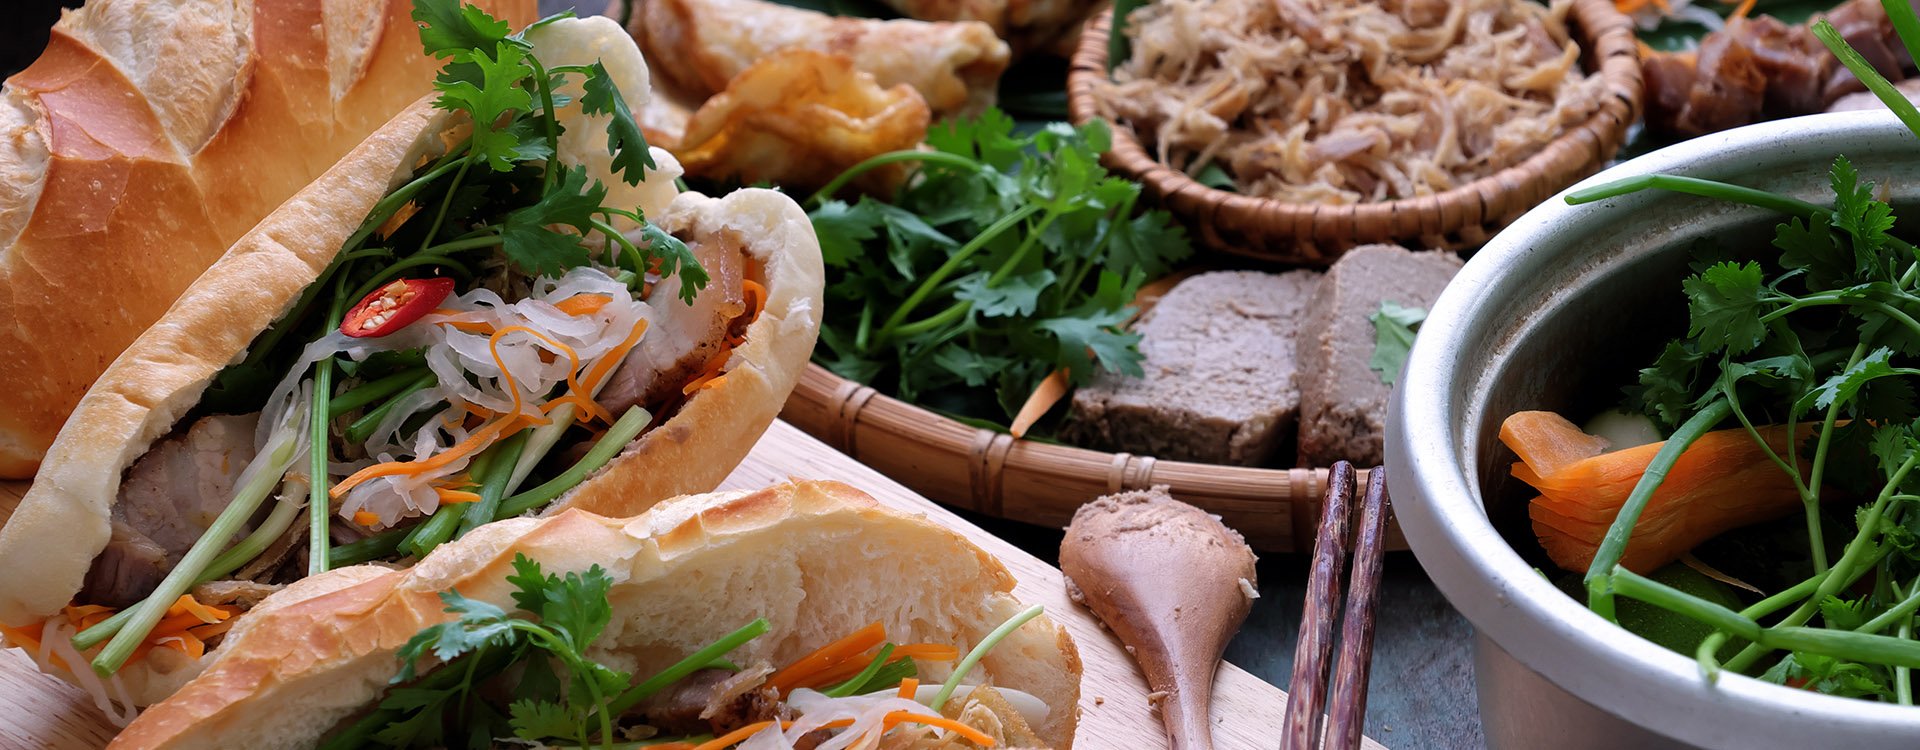 Famous Vietnamese food is banh mi thit bread stuffed with raw ingredients: pork and vegetables